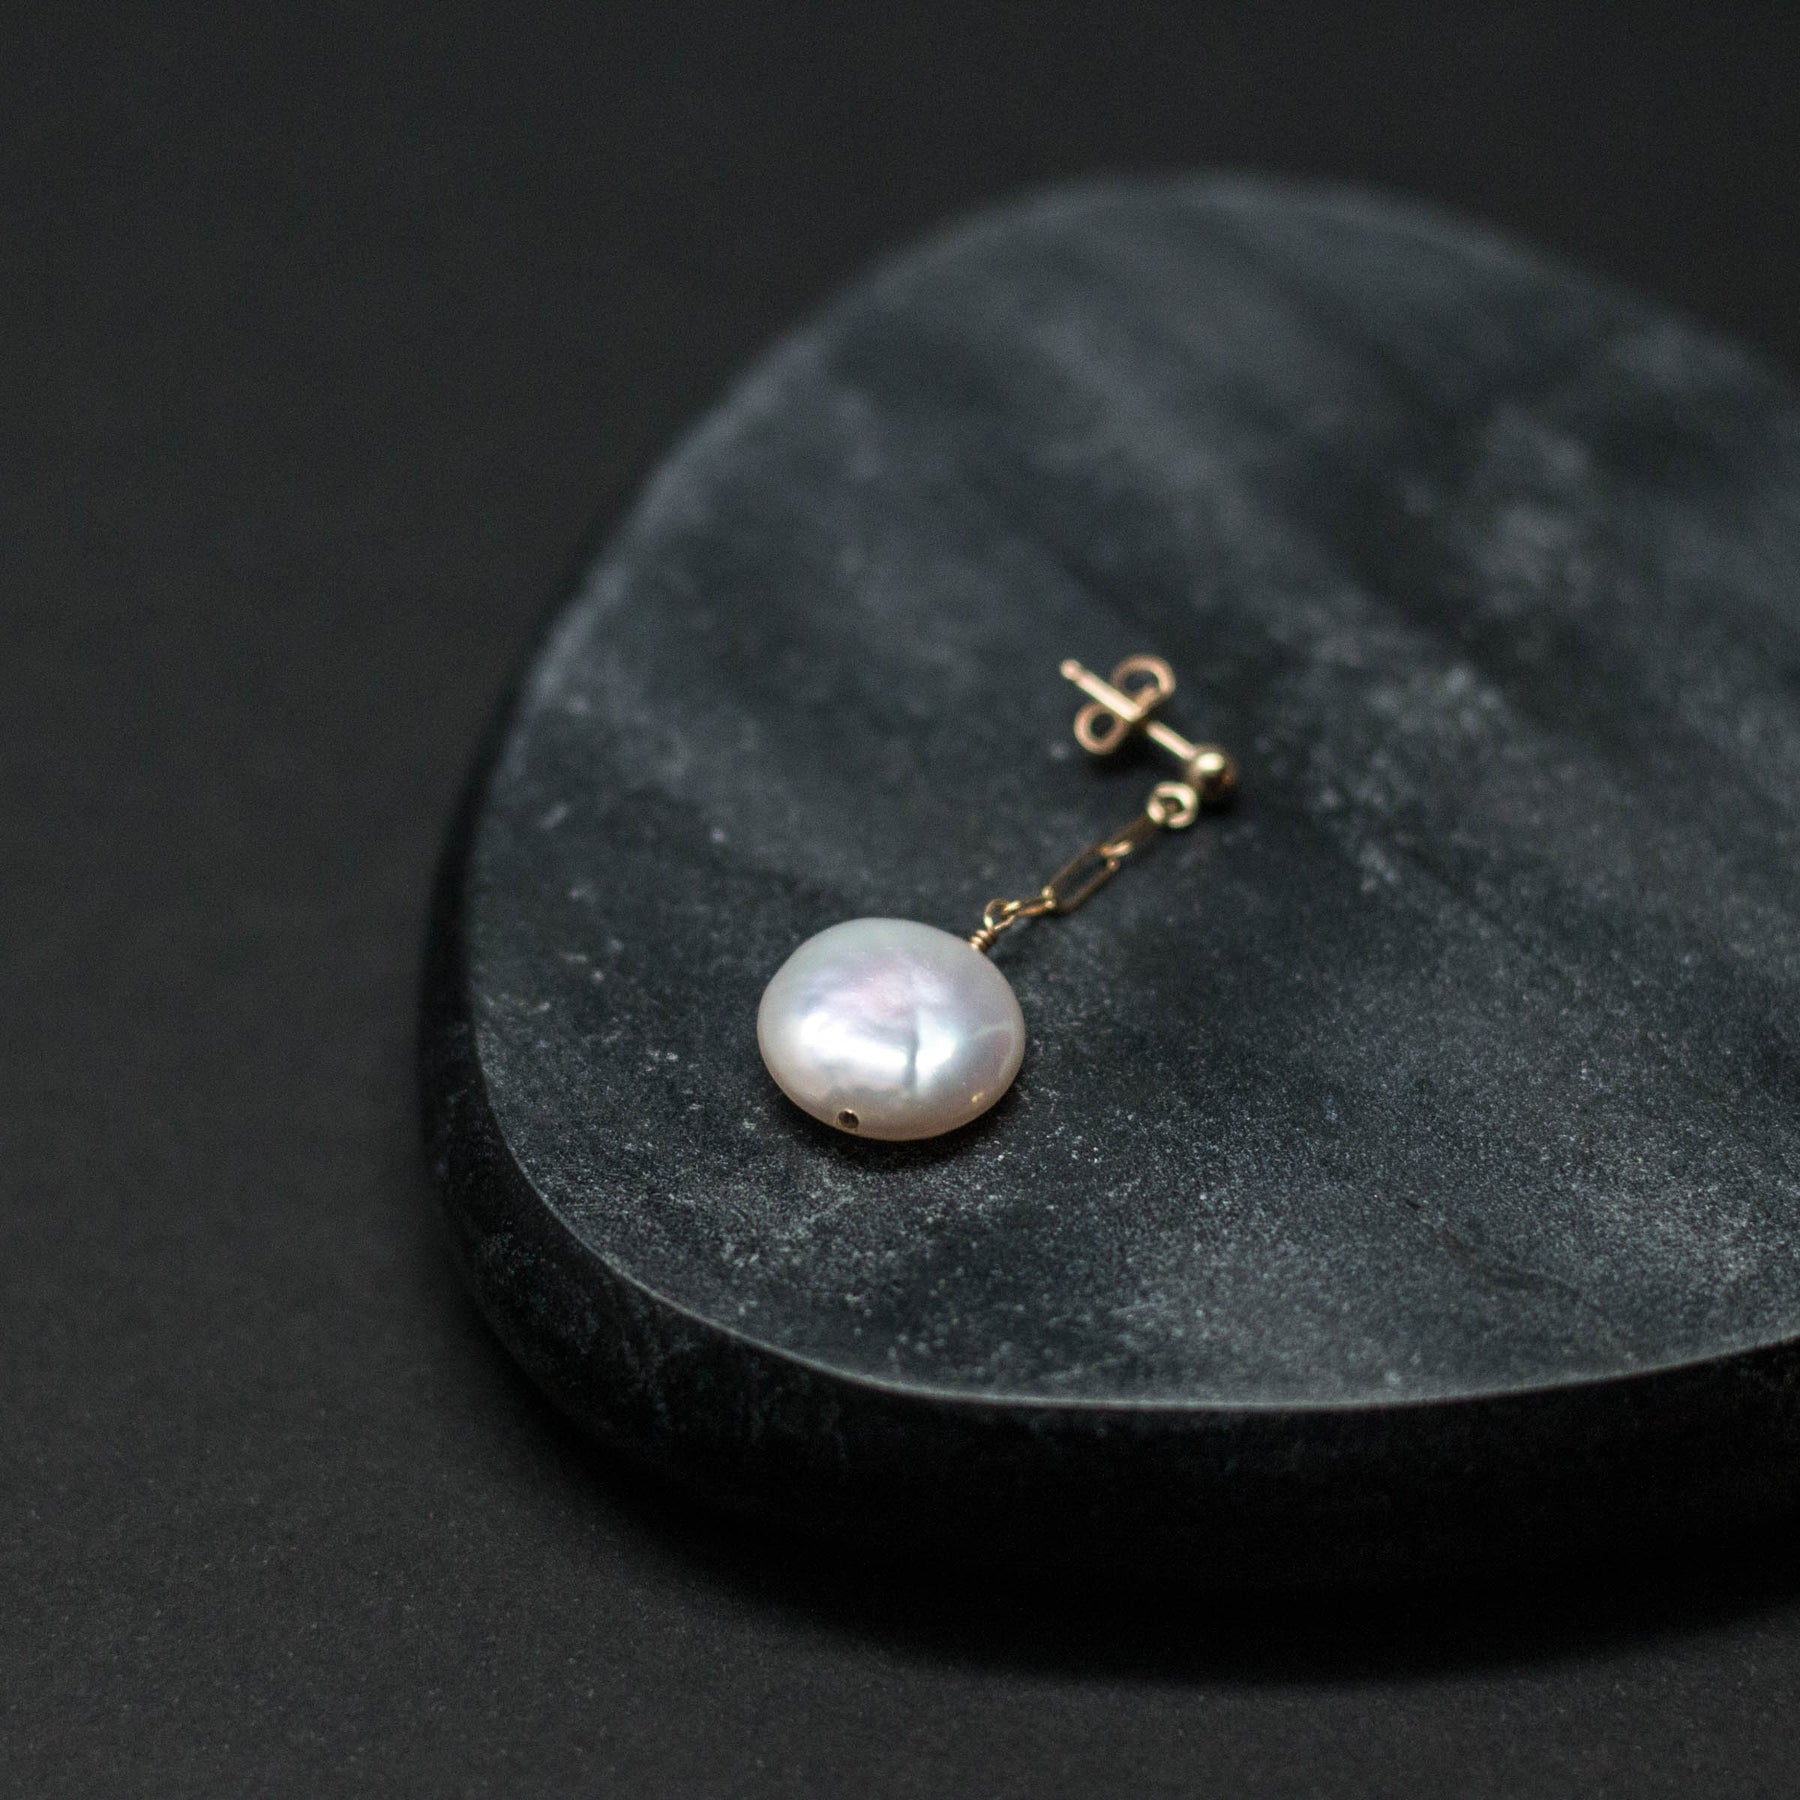 Amazon.com: Freshwater Pearl Stud Earrings: pearl earrings, pearl studs, post  earrings, simple earrings, stud earrings, dainty earrings, small studs :  Handmade Products